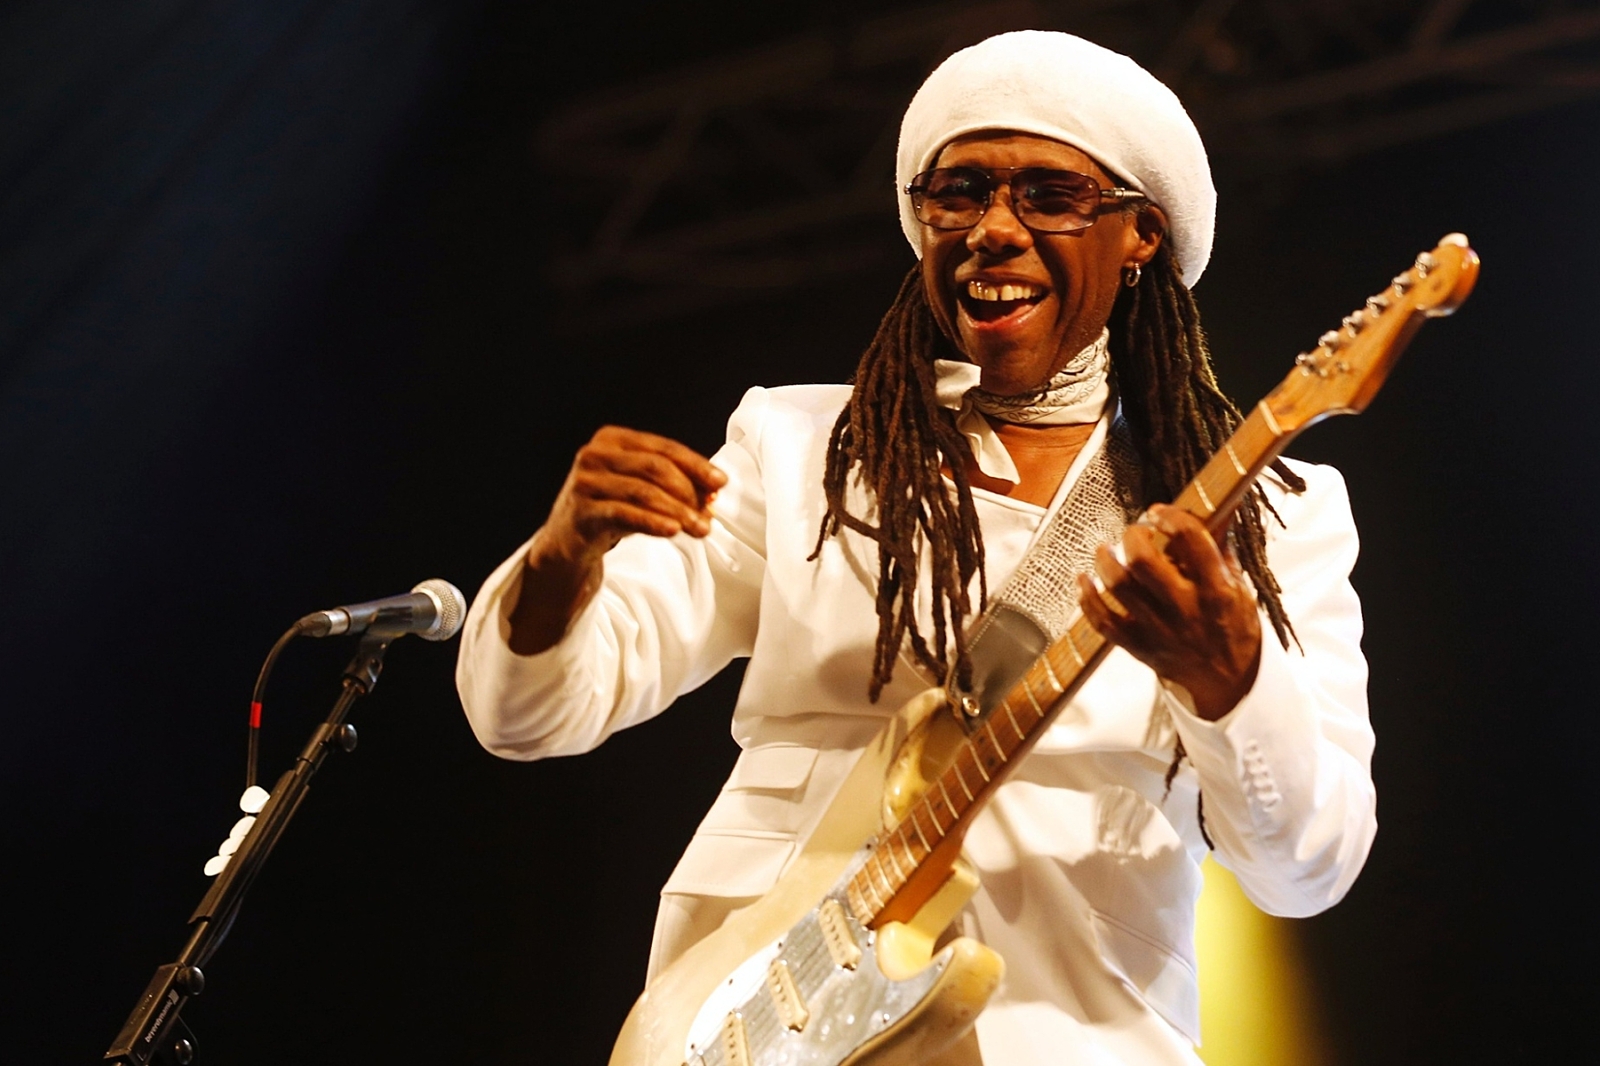 Nile Rodgers to curate Meltdown Festival 2019